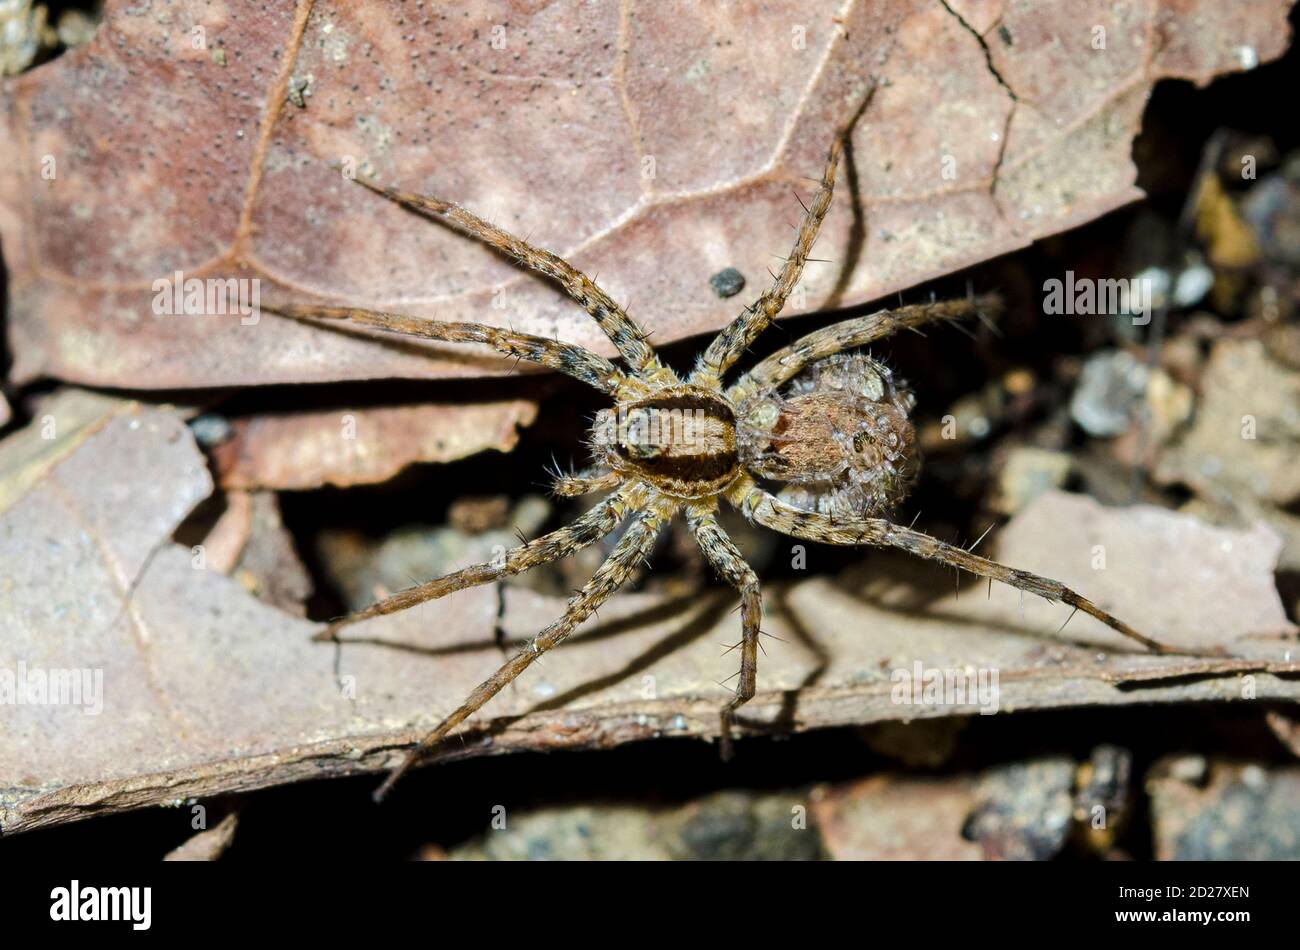 Wolf Spider, Lycosidae Family, carrying young spiders, Klungkung, Bali, Indonesia Stock Photo